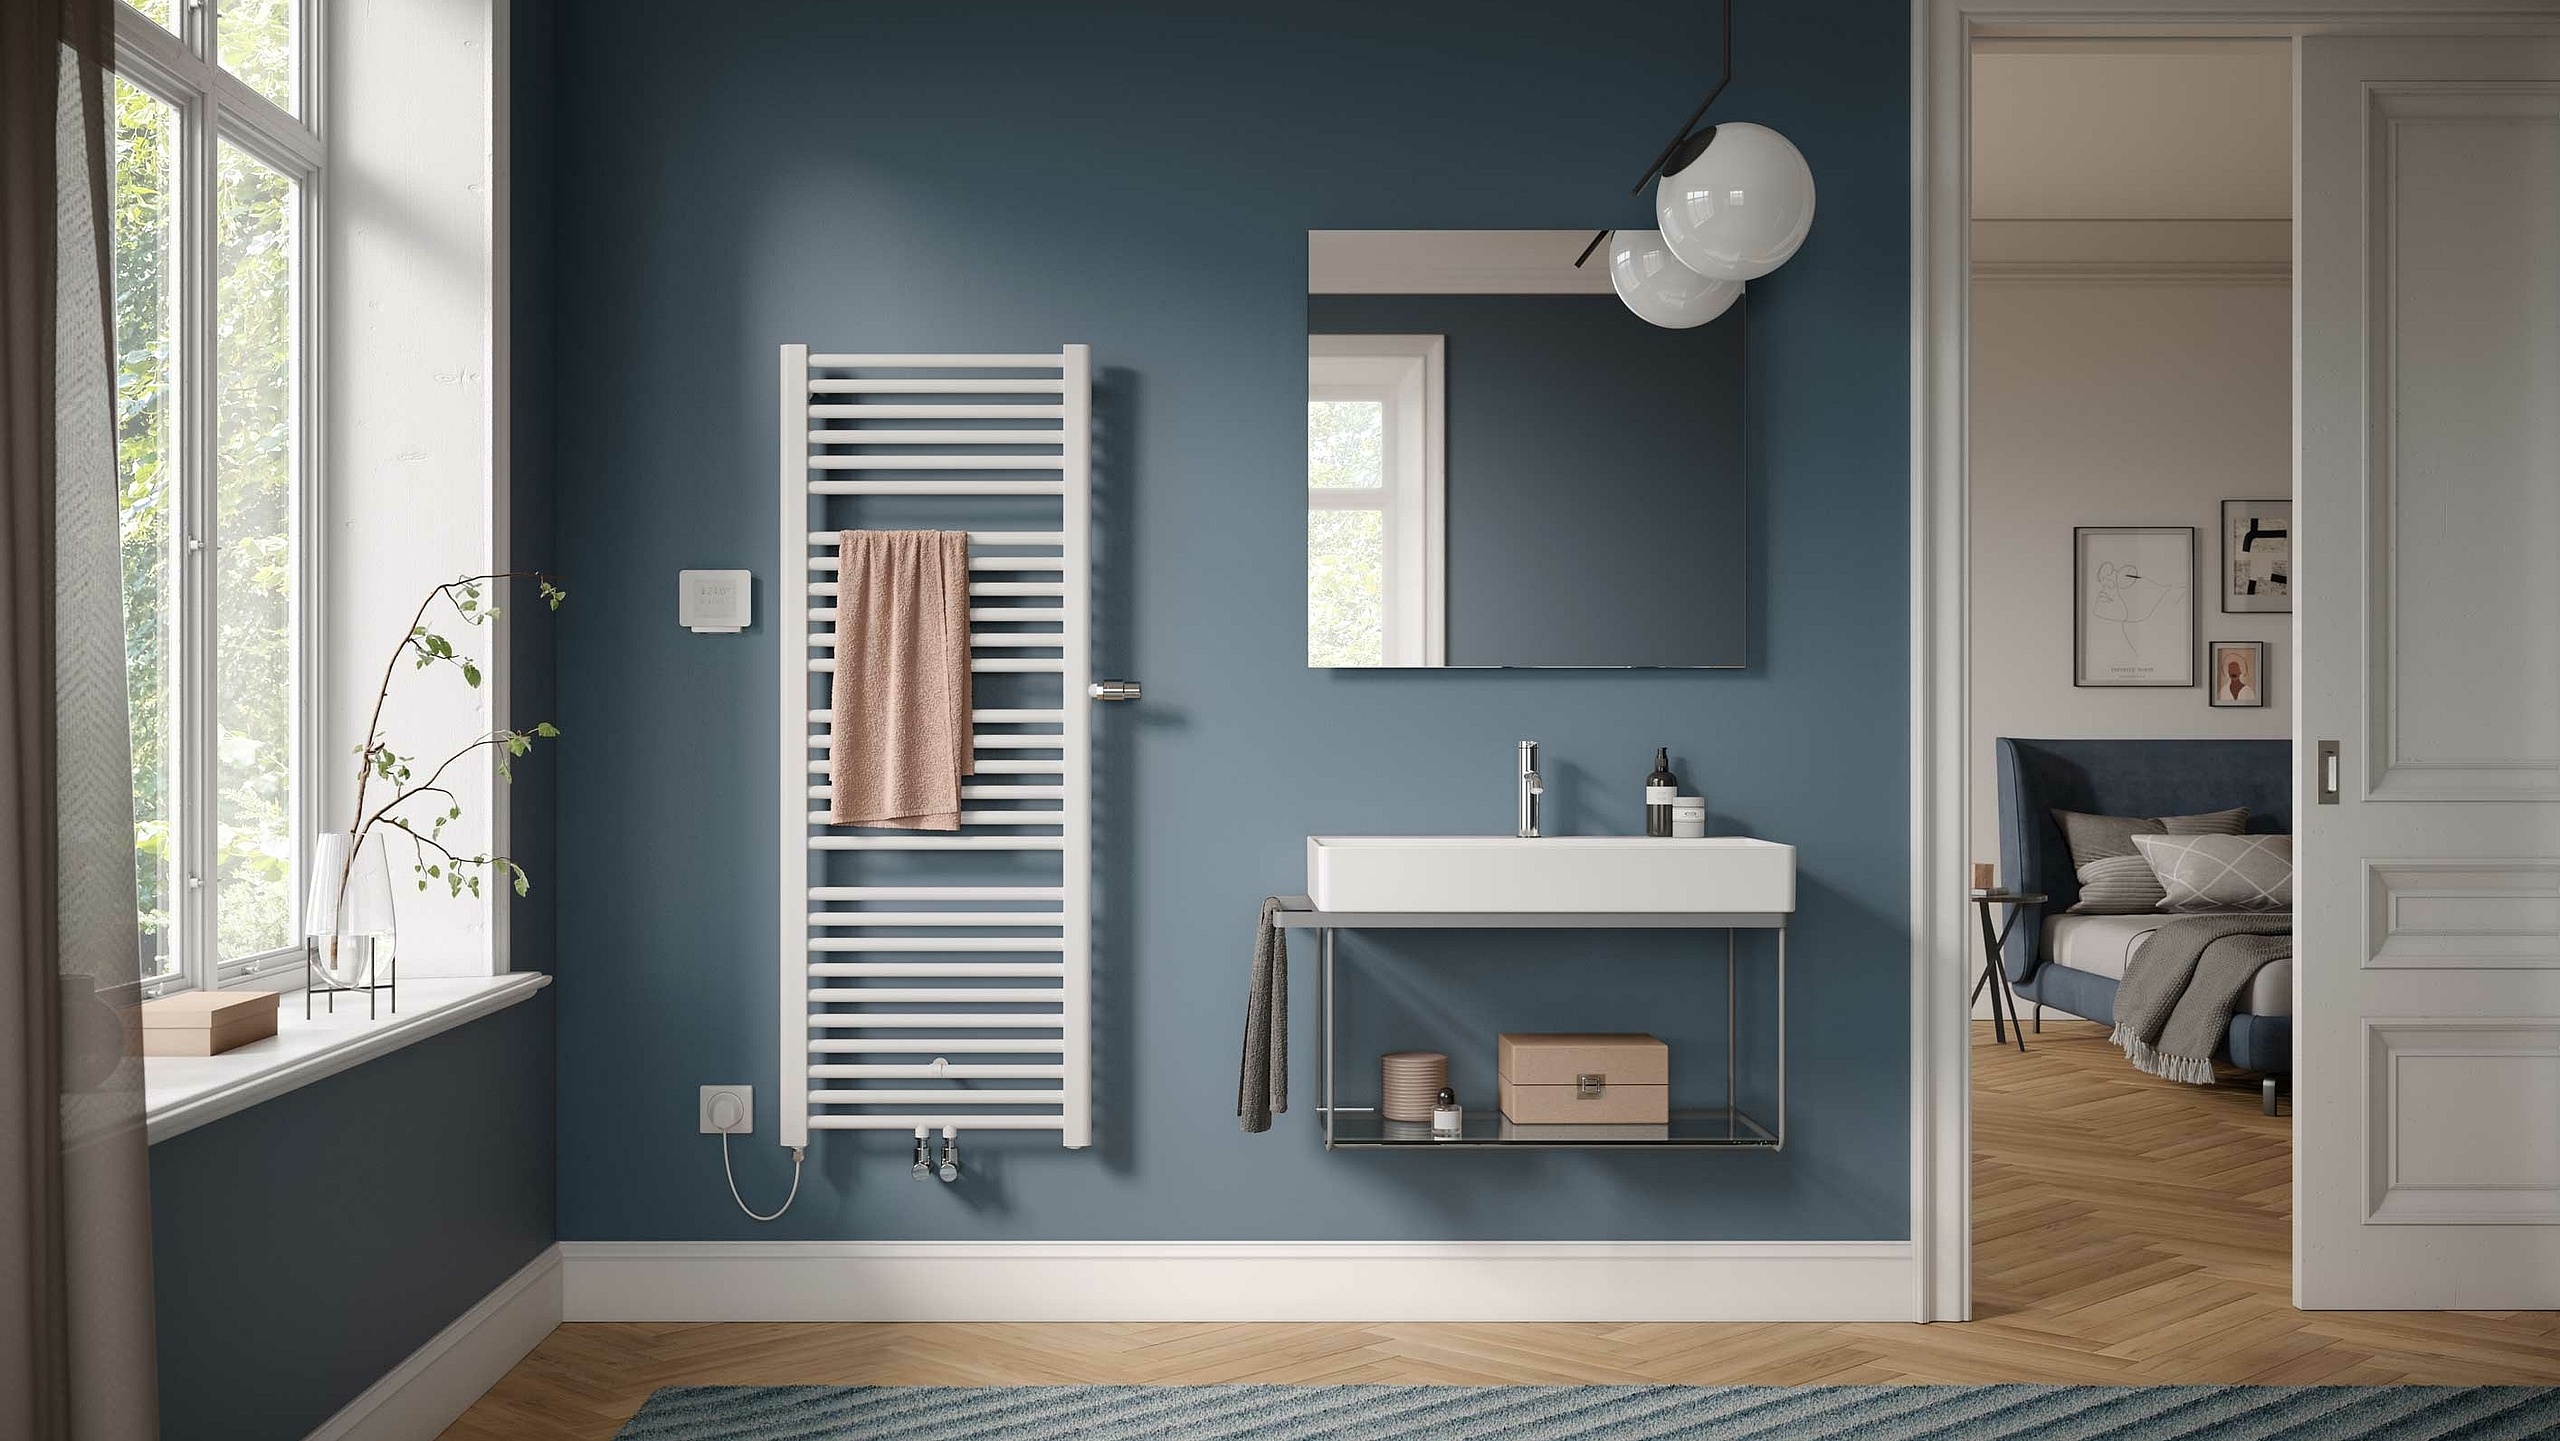 Kermi Basic plus designer and bathroom radiators also available in an electric version.